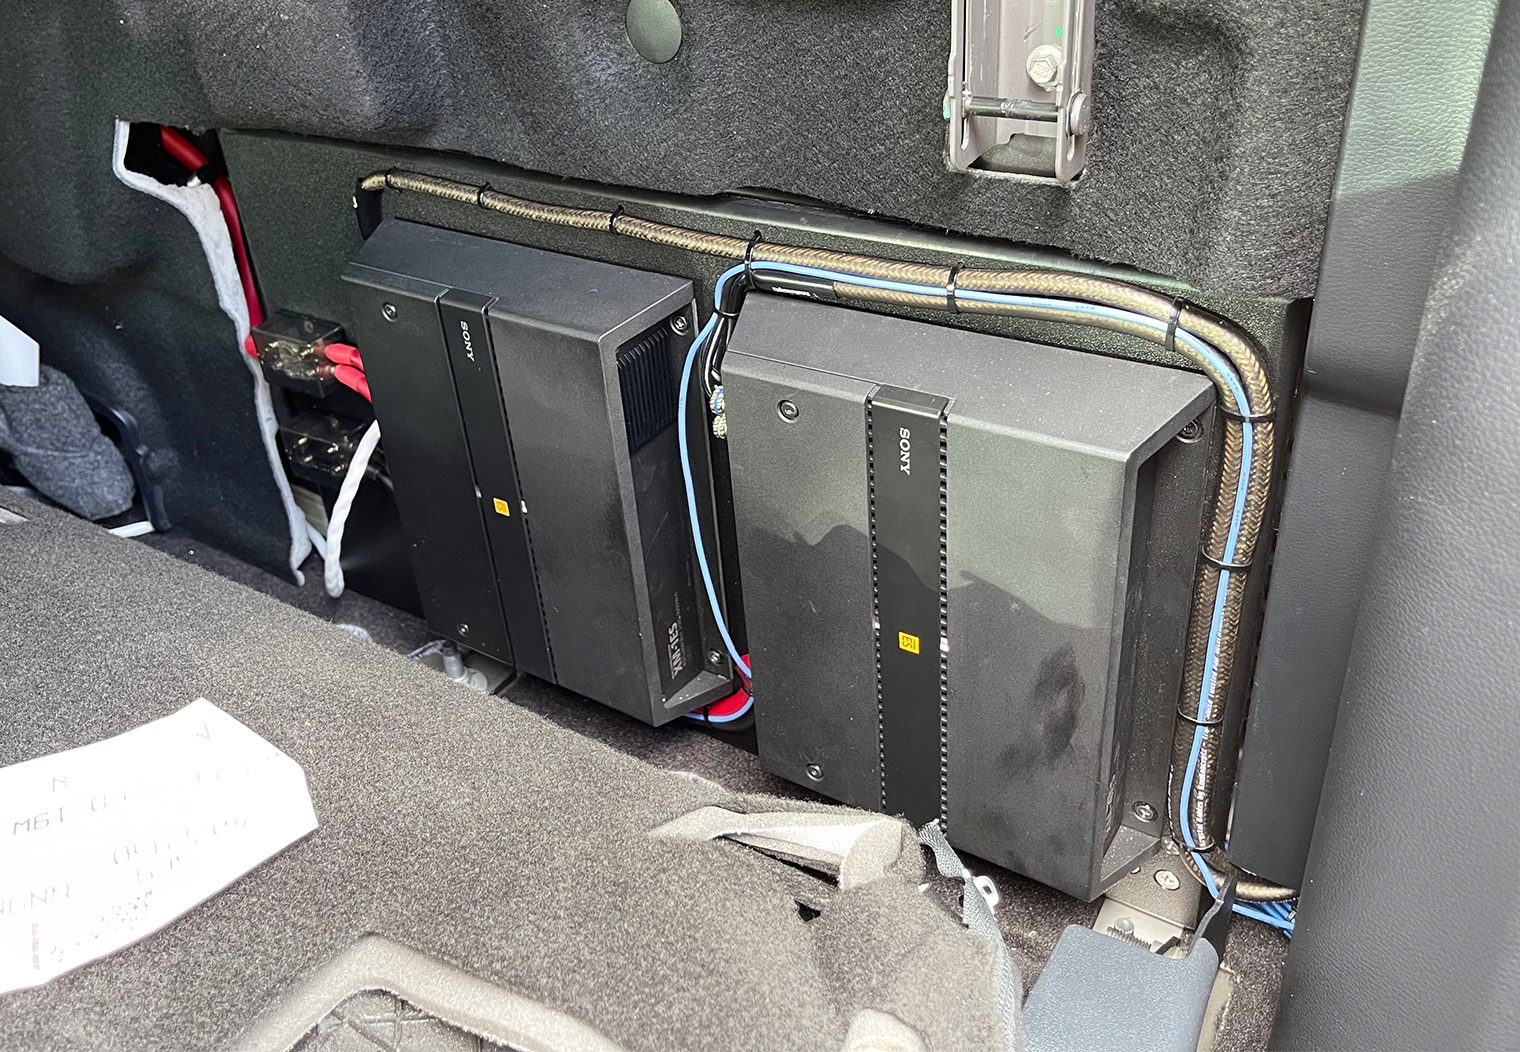 Ford F-150 Custom Amp Rack Install Completed